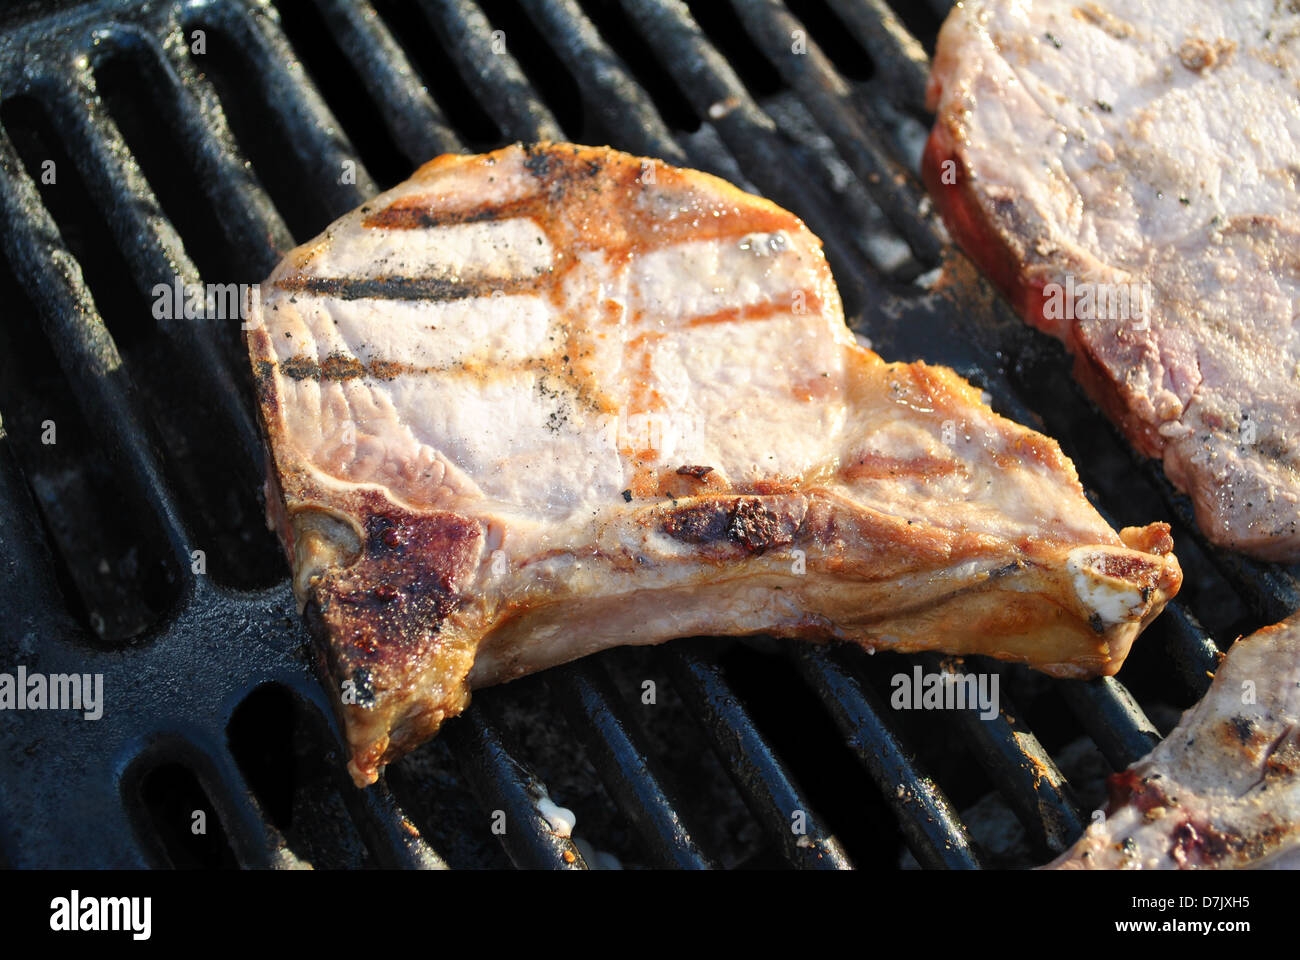 One Grilled Pork Chop Stock Photo